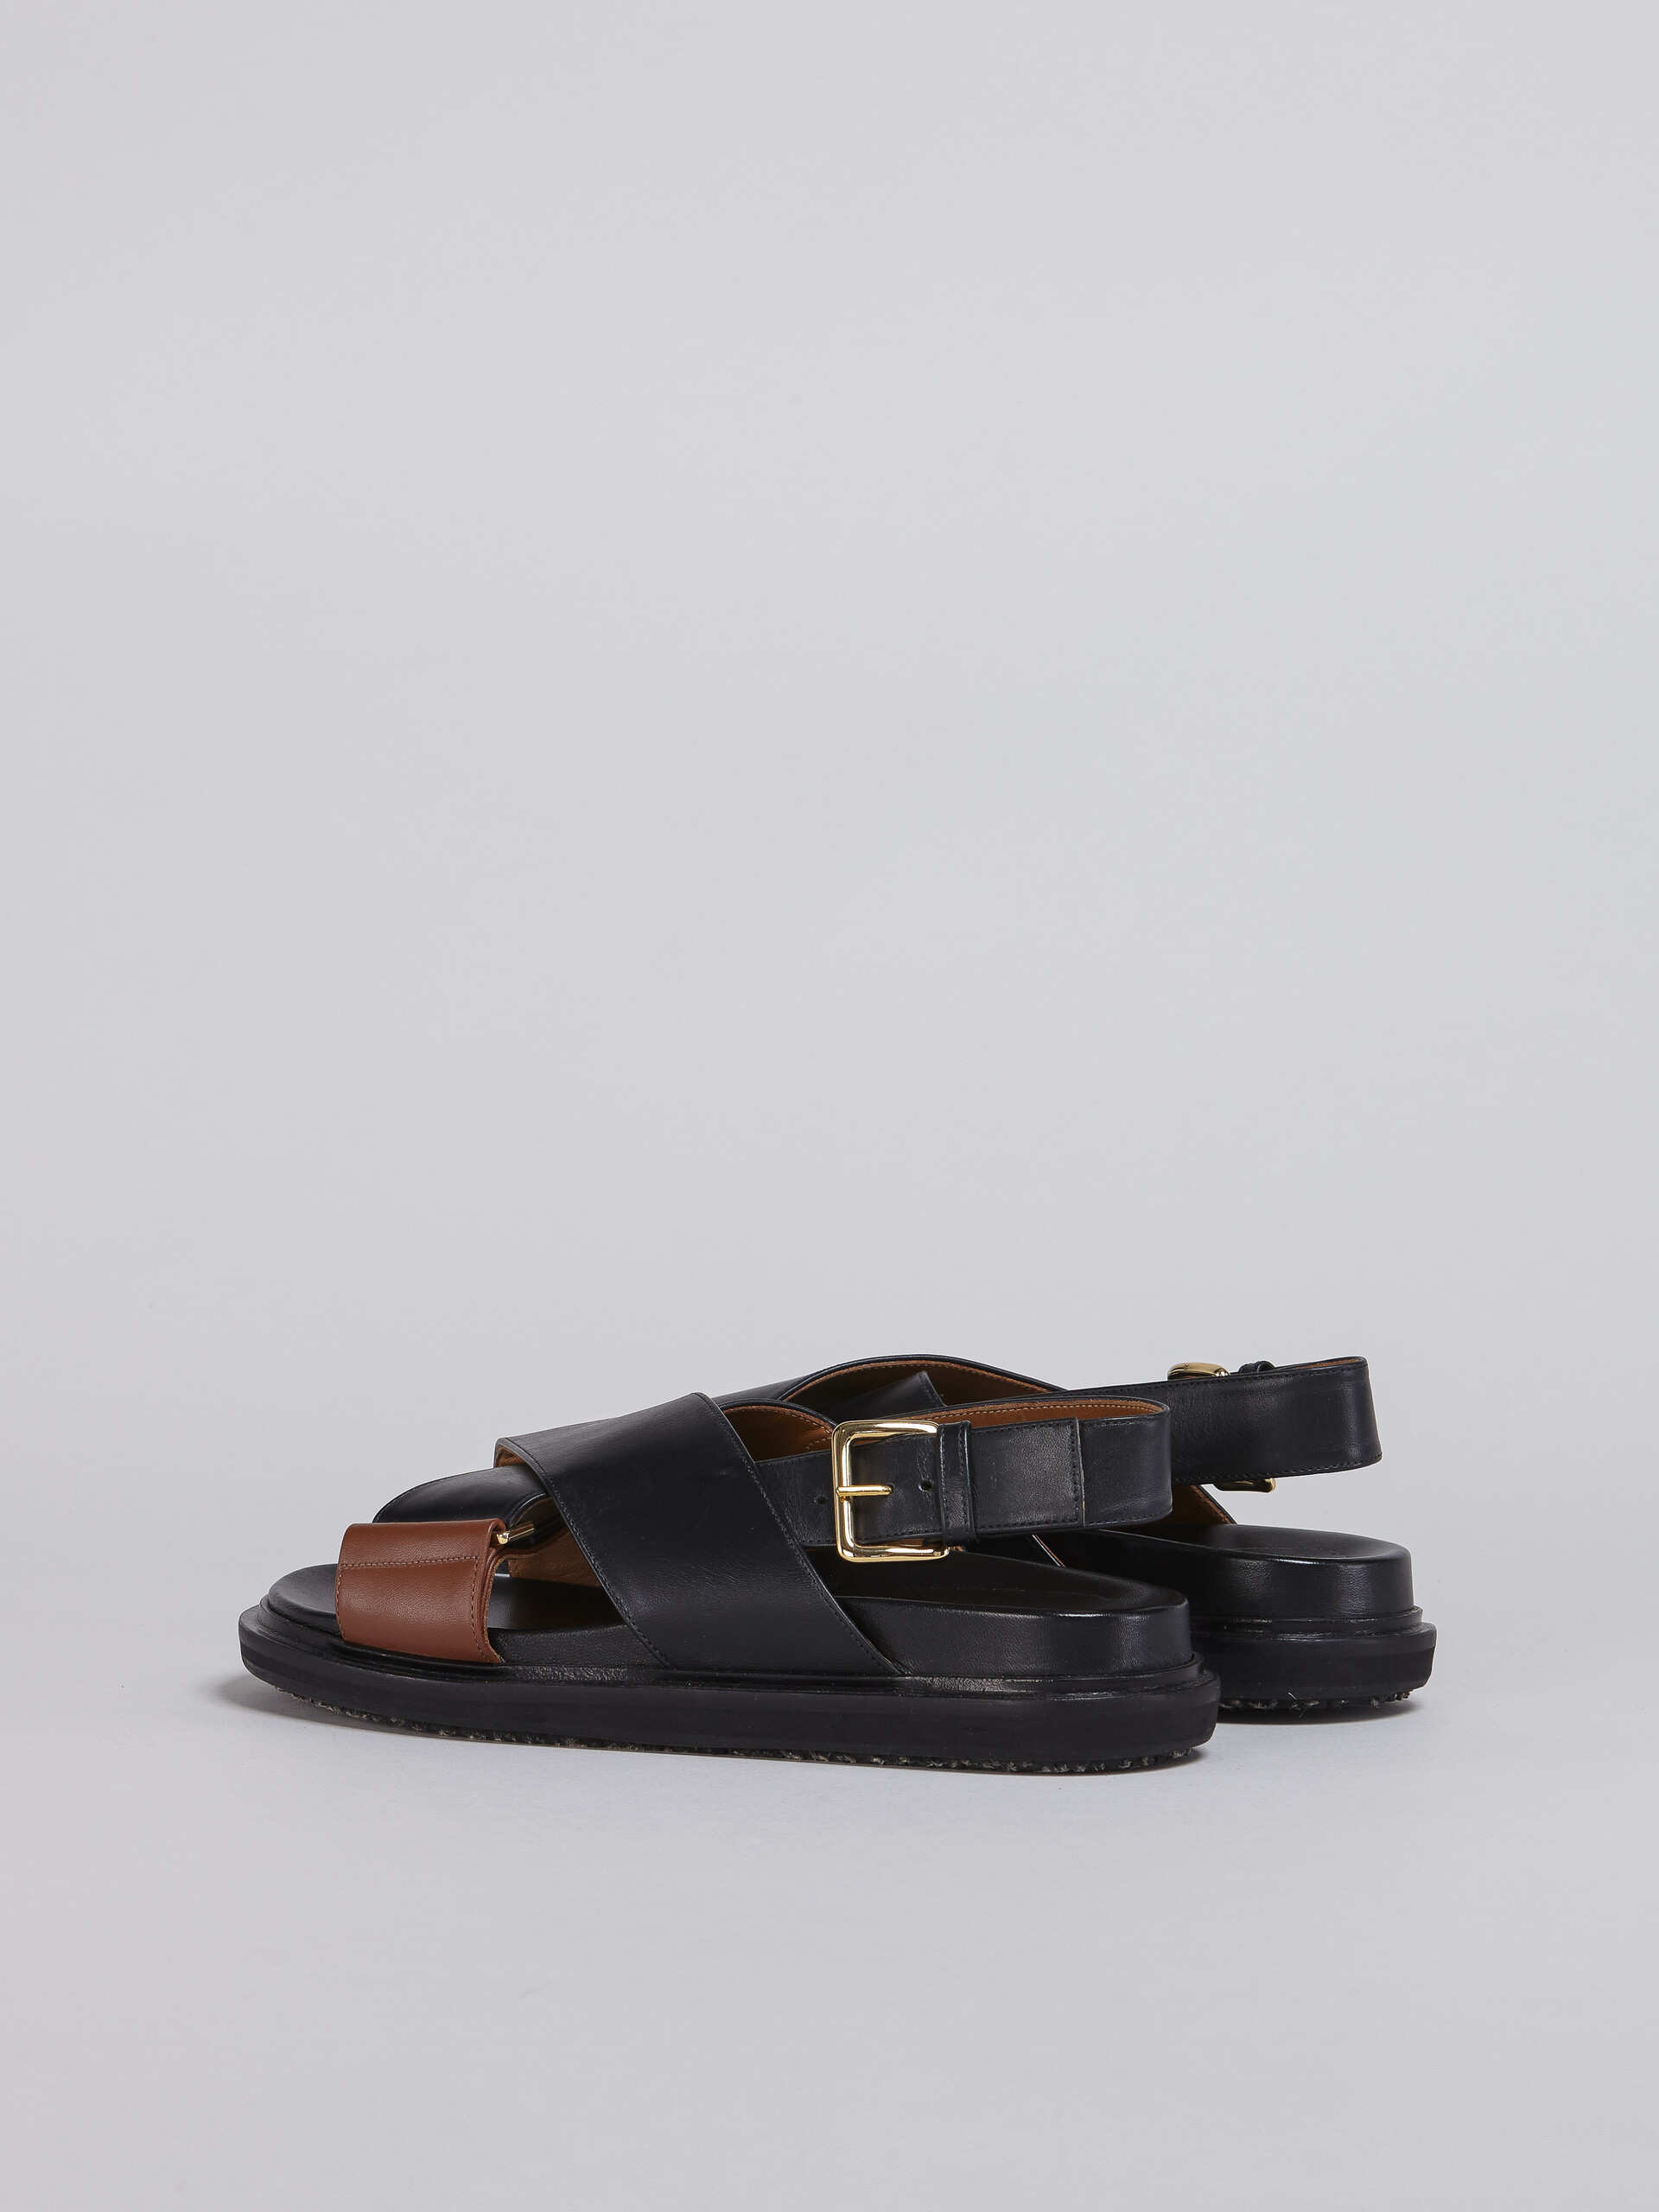 Black and brown smooth calf leather fussbett - Sandals - Image 3